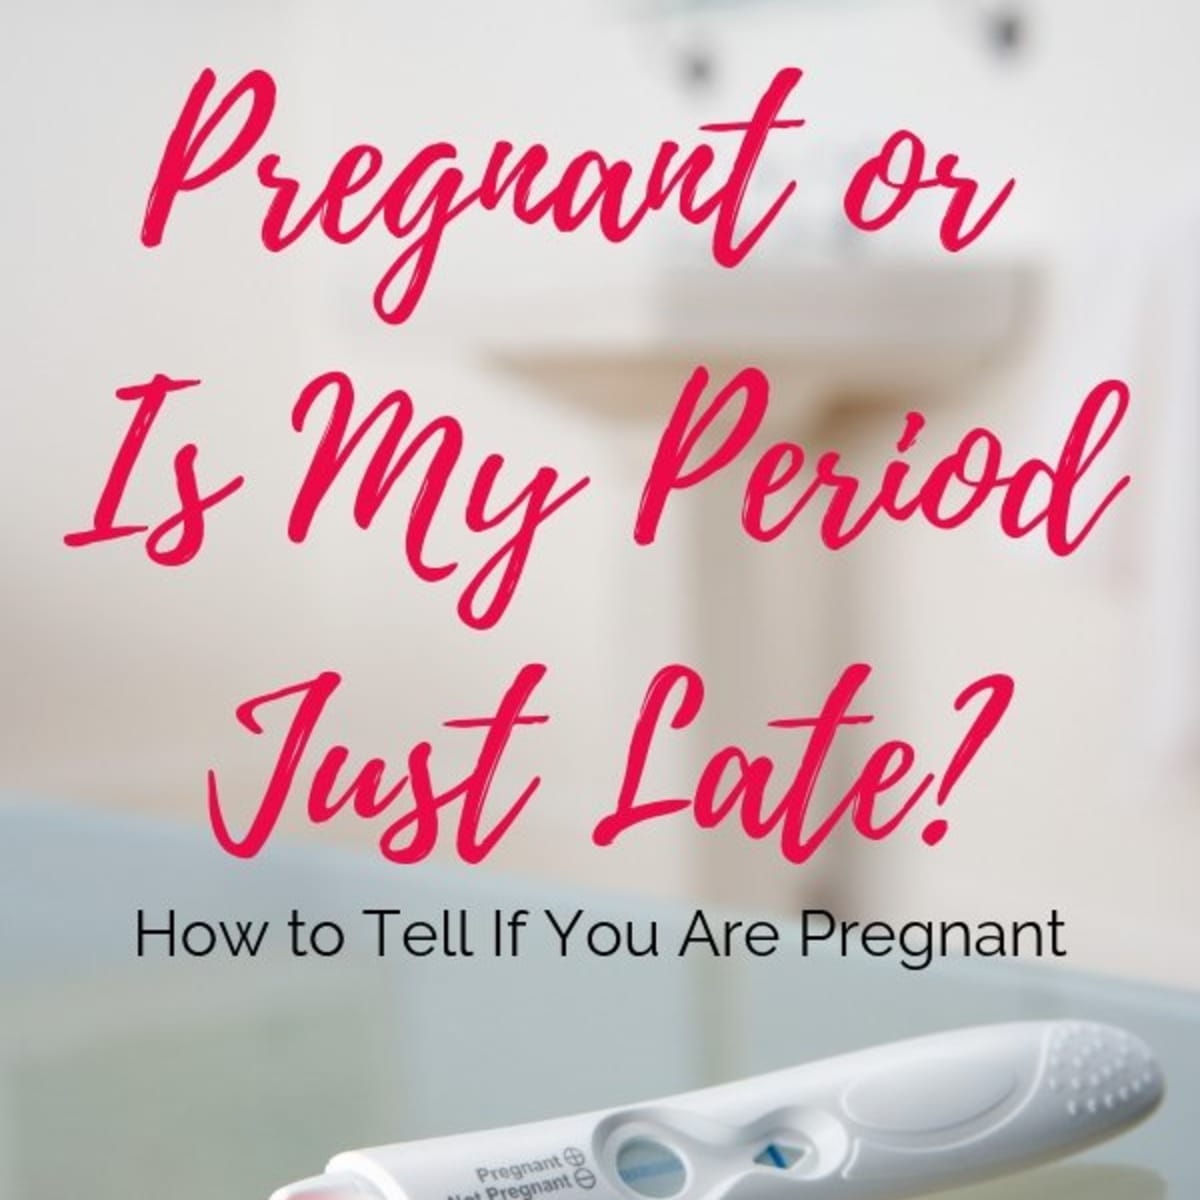 Withdrawal bleed means not pregnant